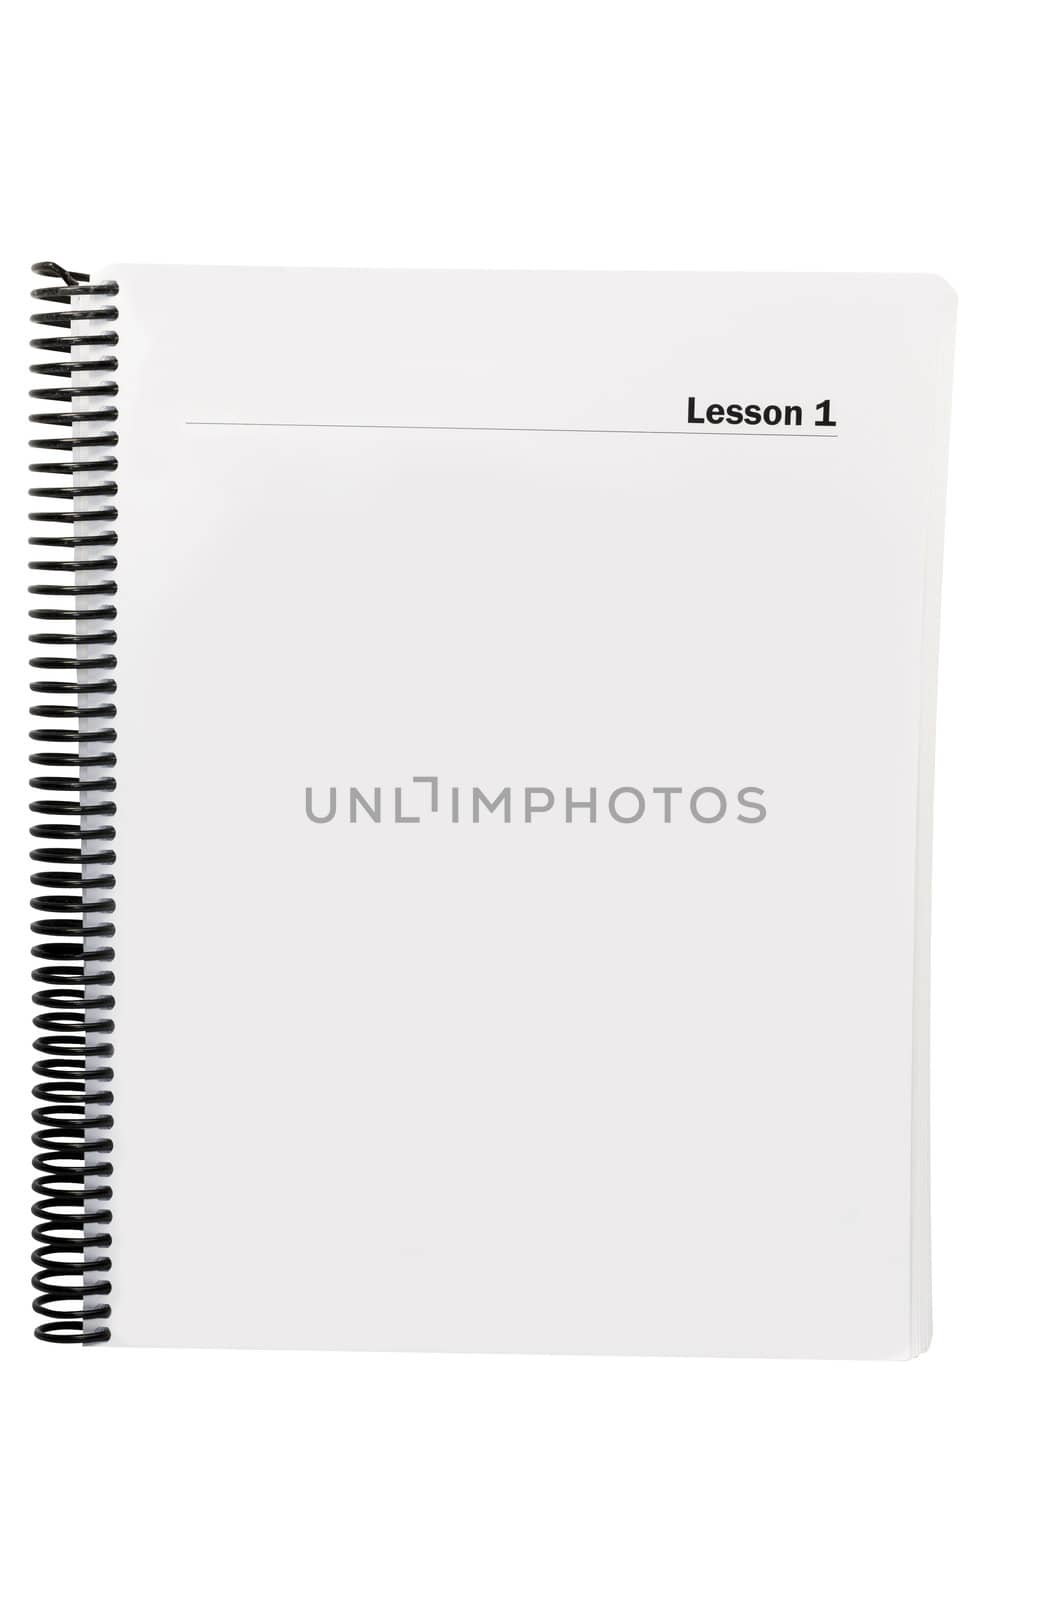 Spiral notebook opened to page with copy space.  Isolated on white with clipping path.